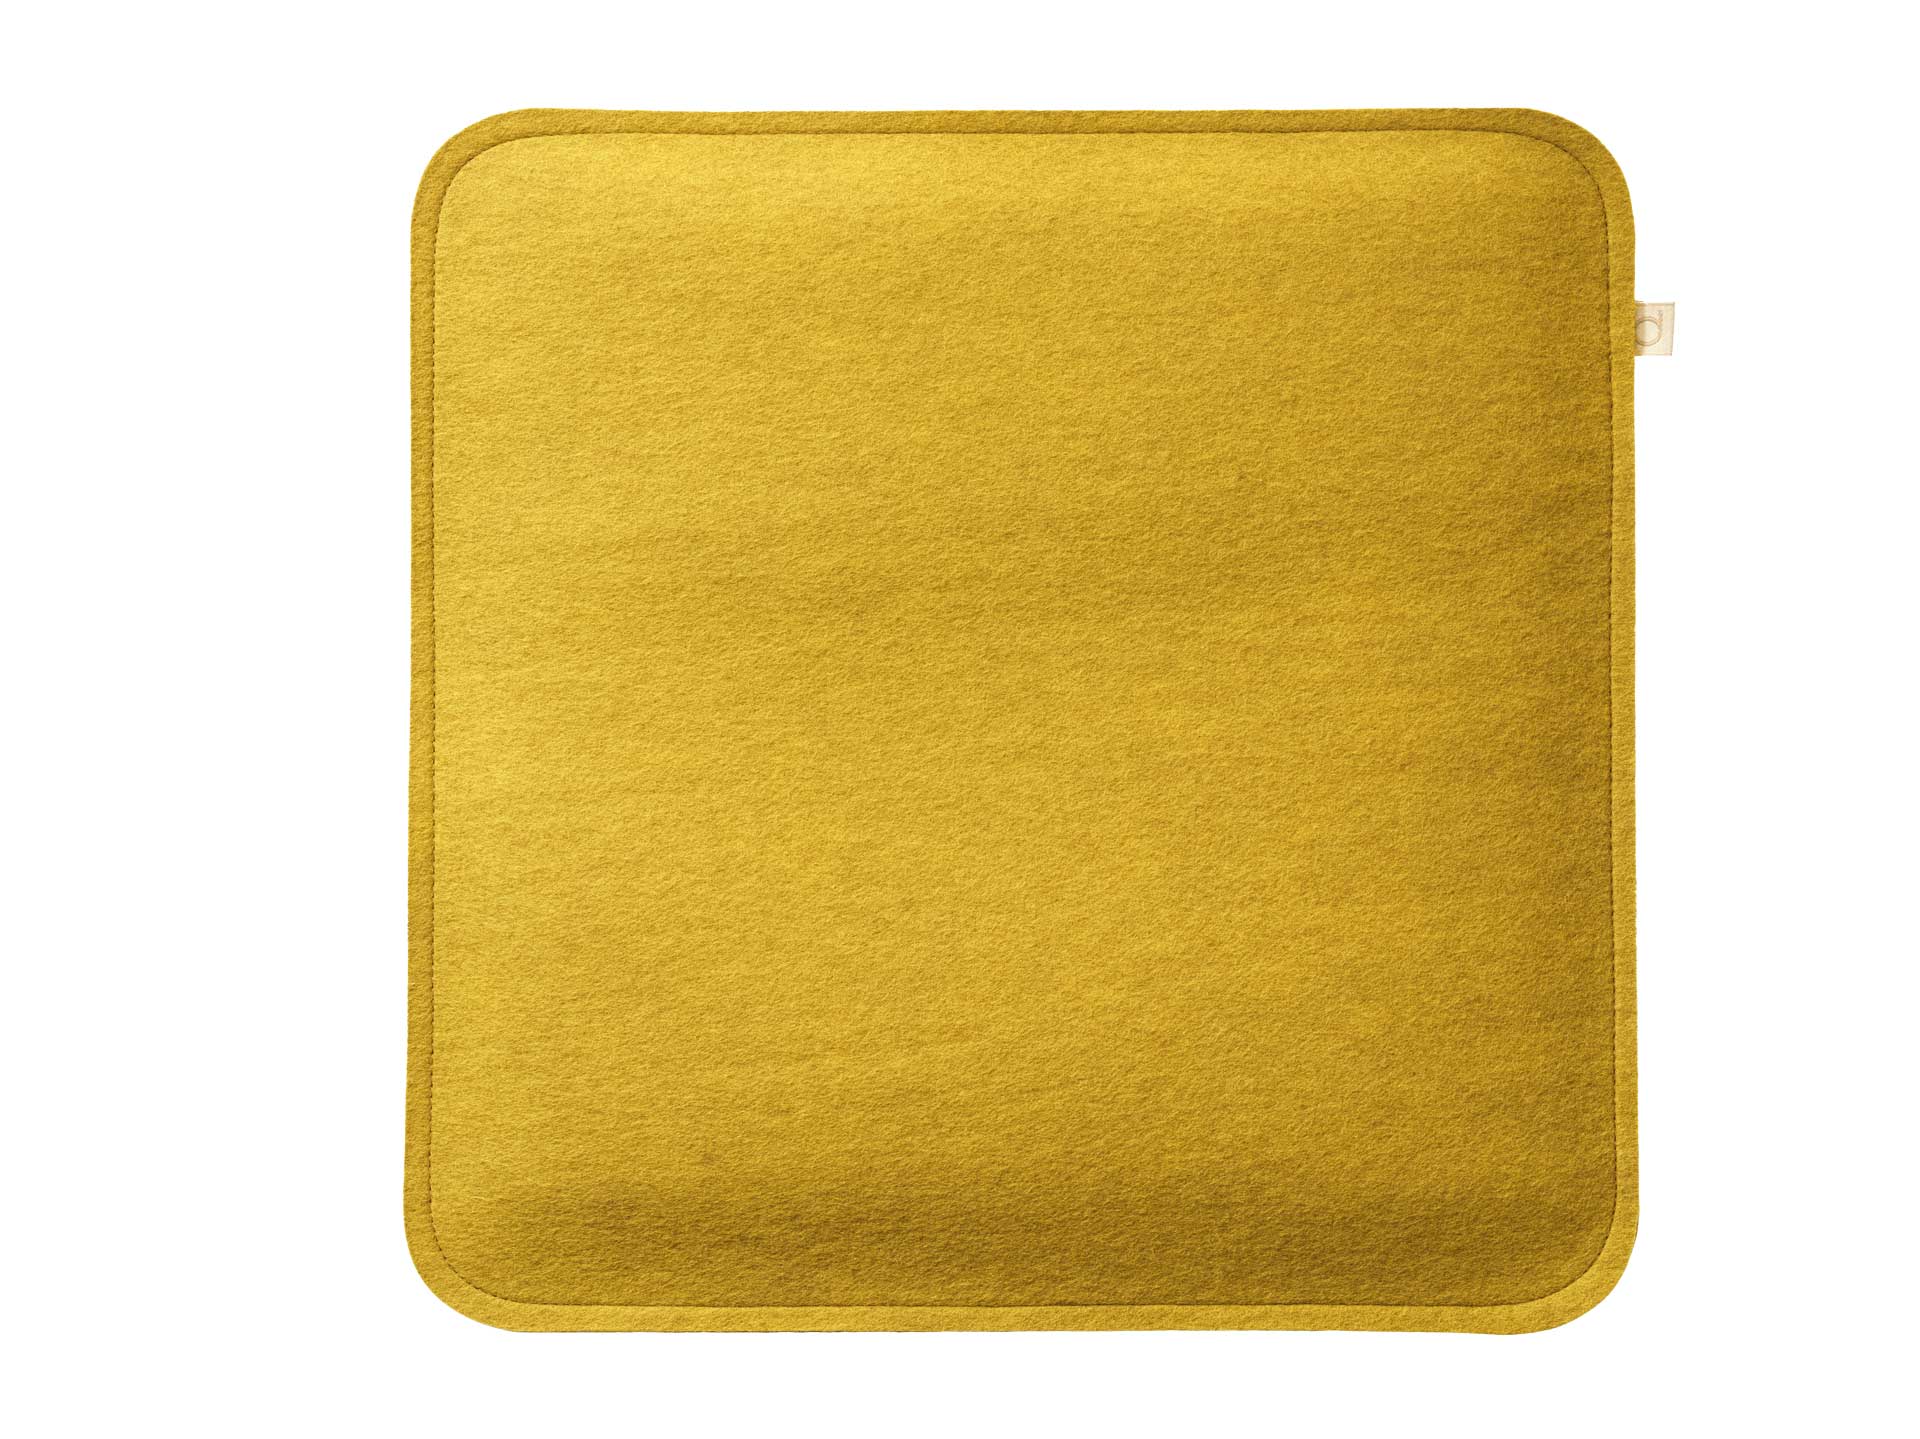 Upolstered Seat Pad